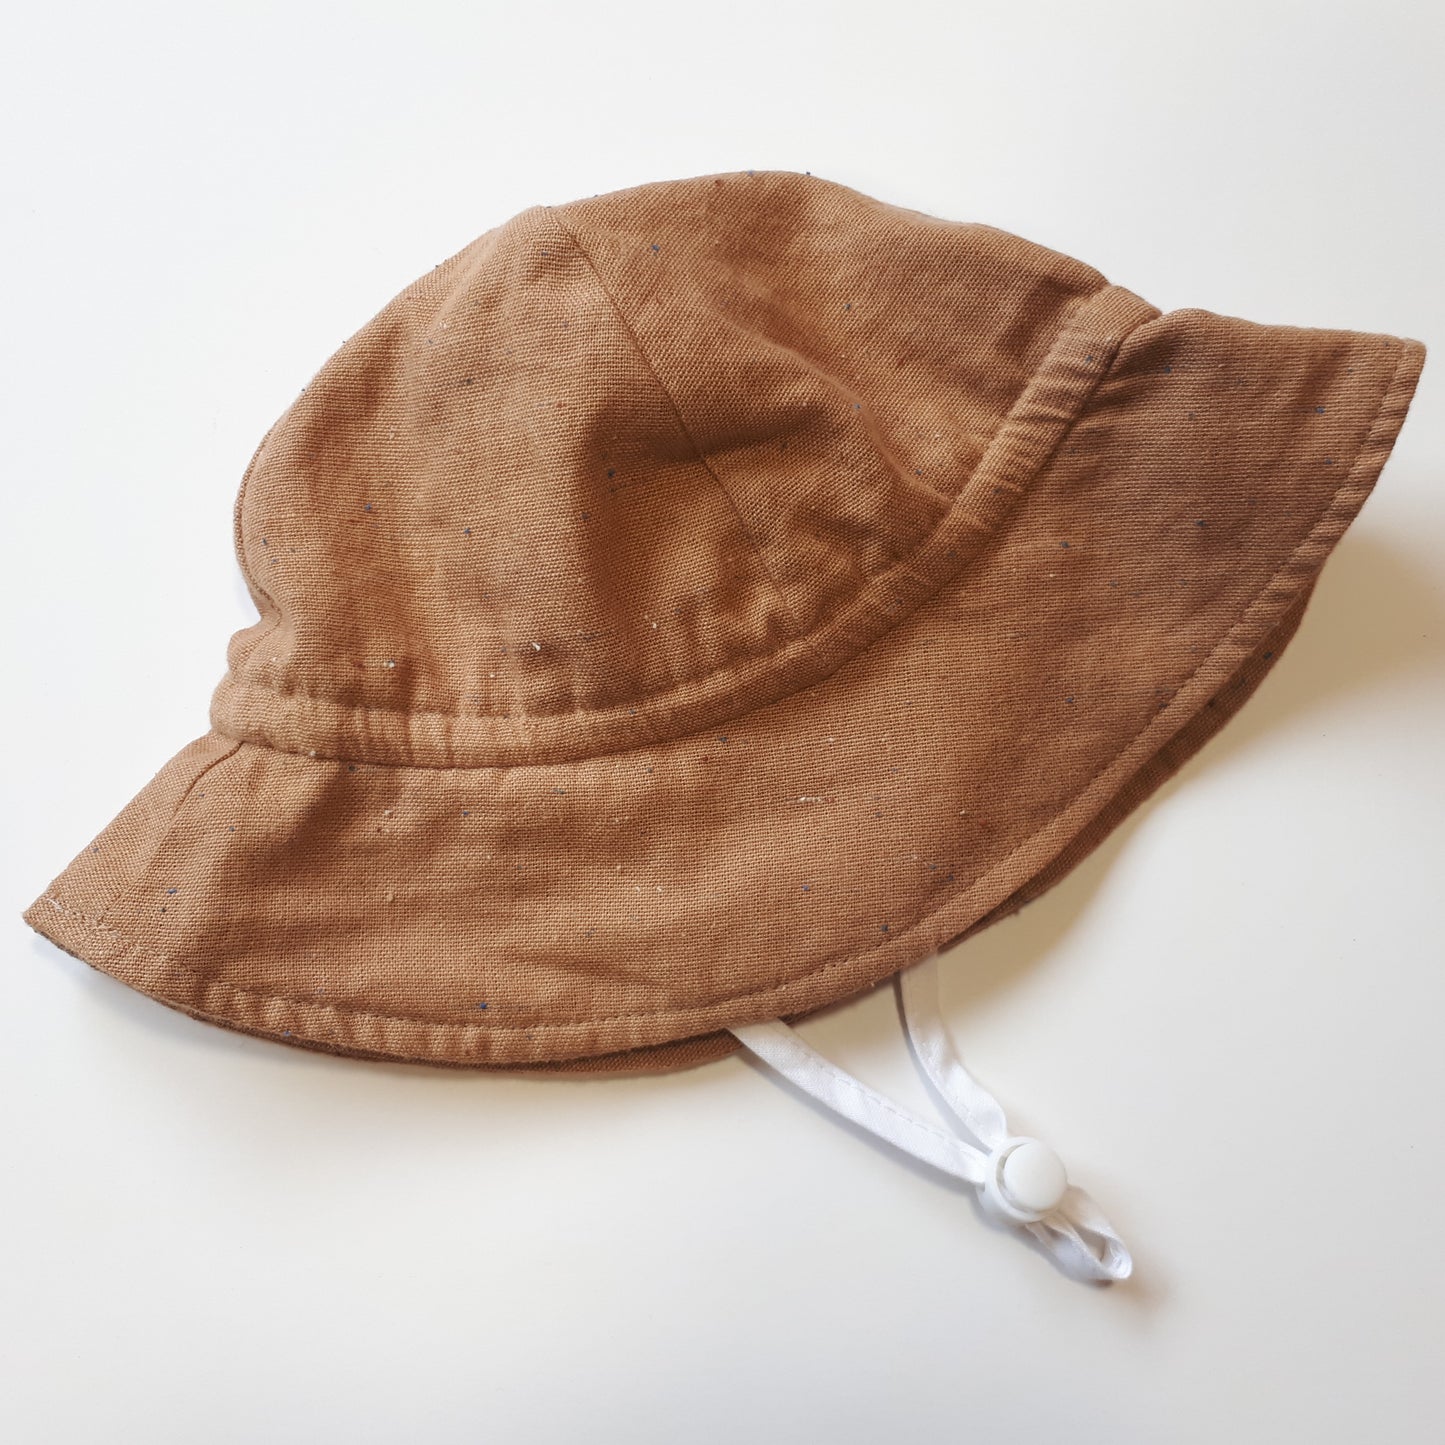 Linen Sunhat - Toffee Sprinkle